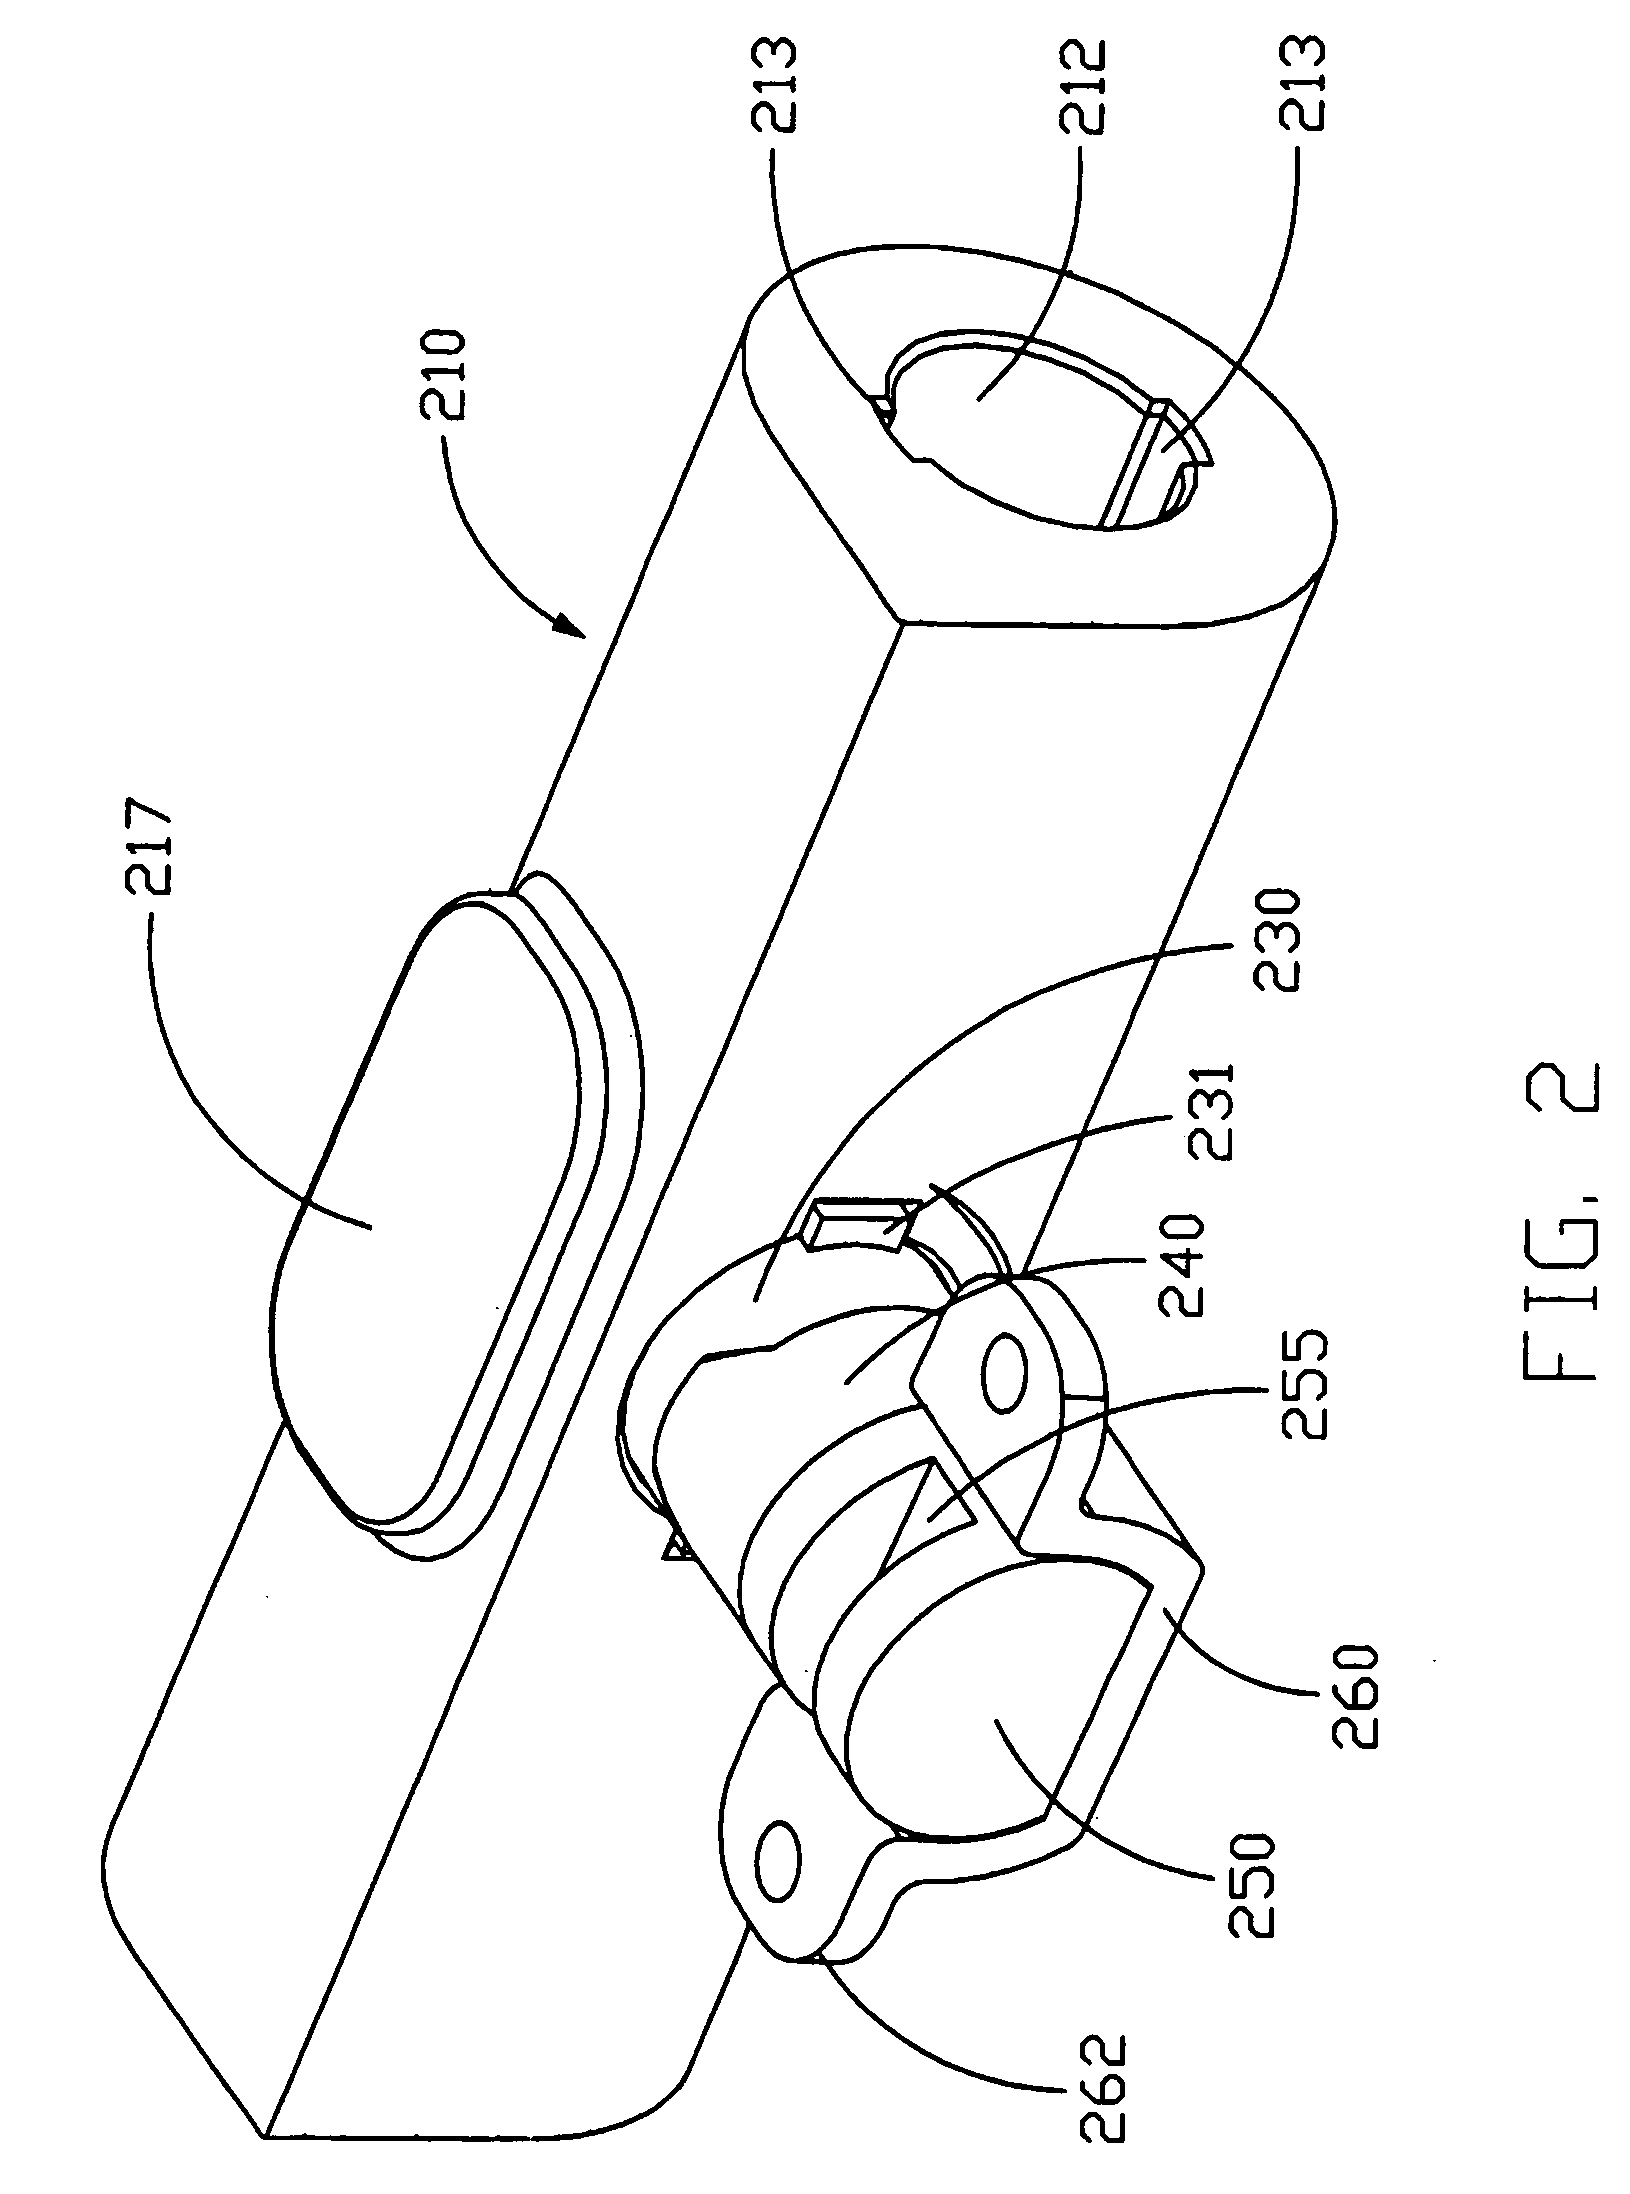 Rotary type hinge assembly for foldable electronic device